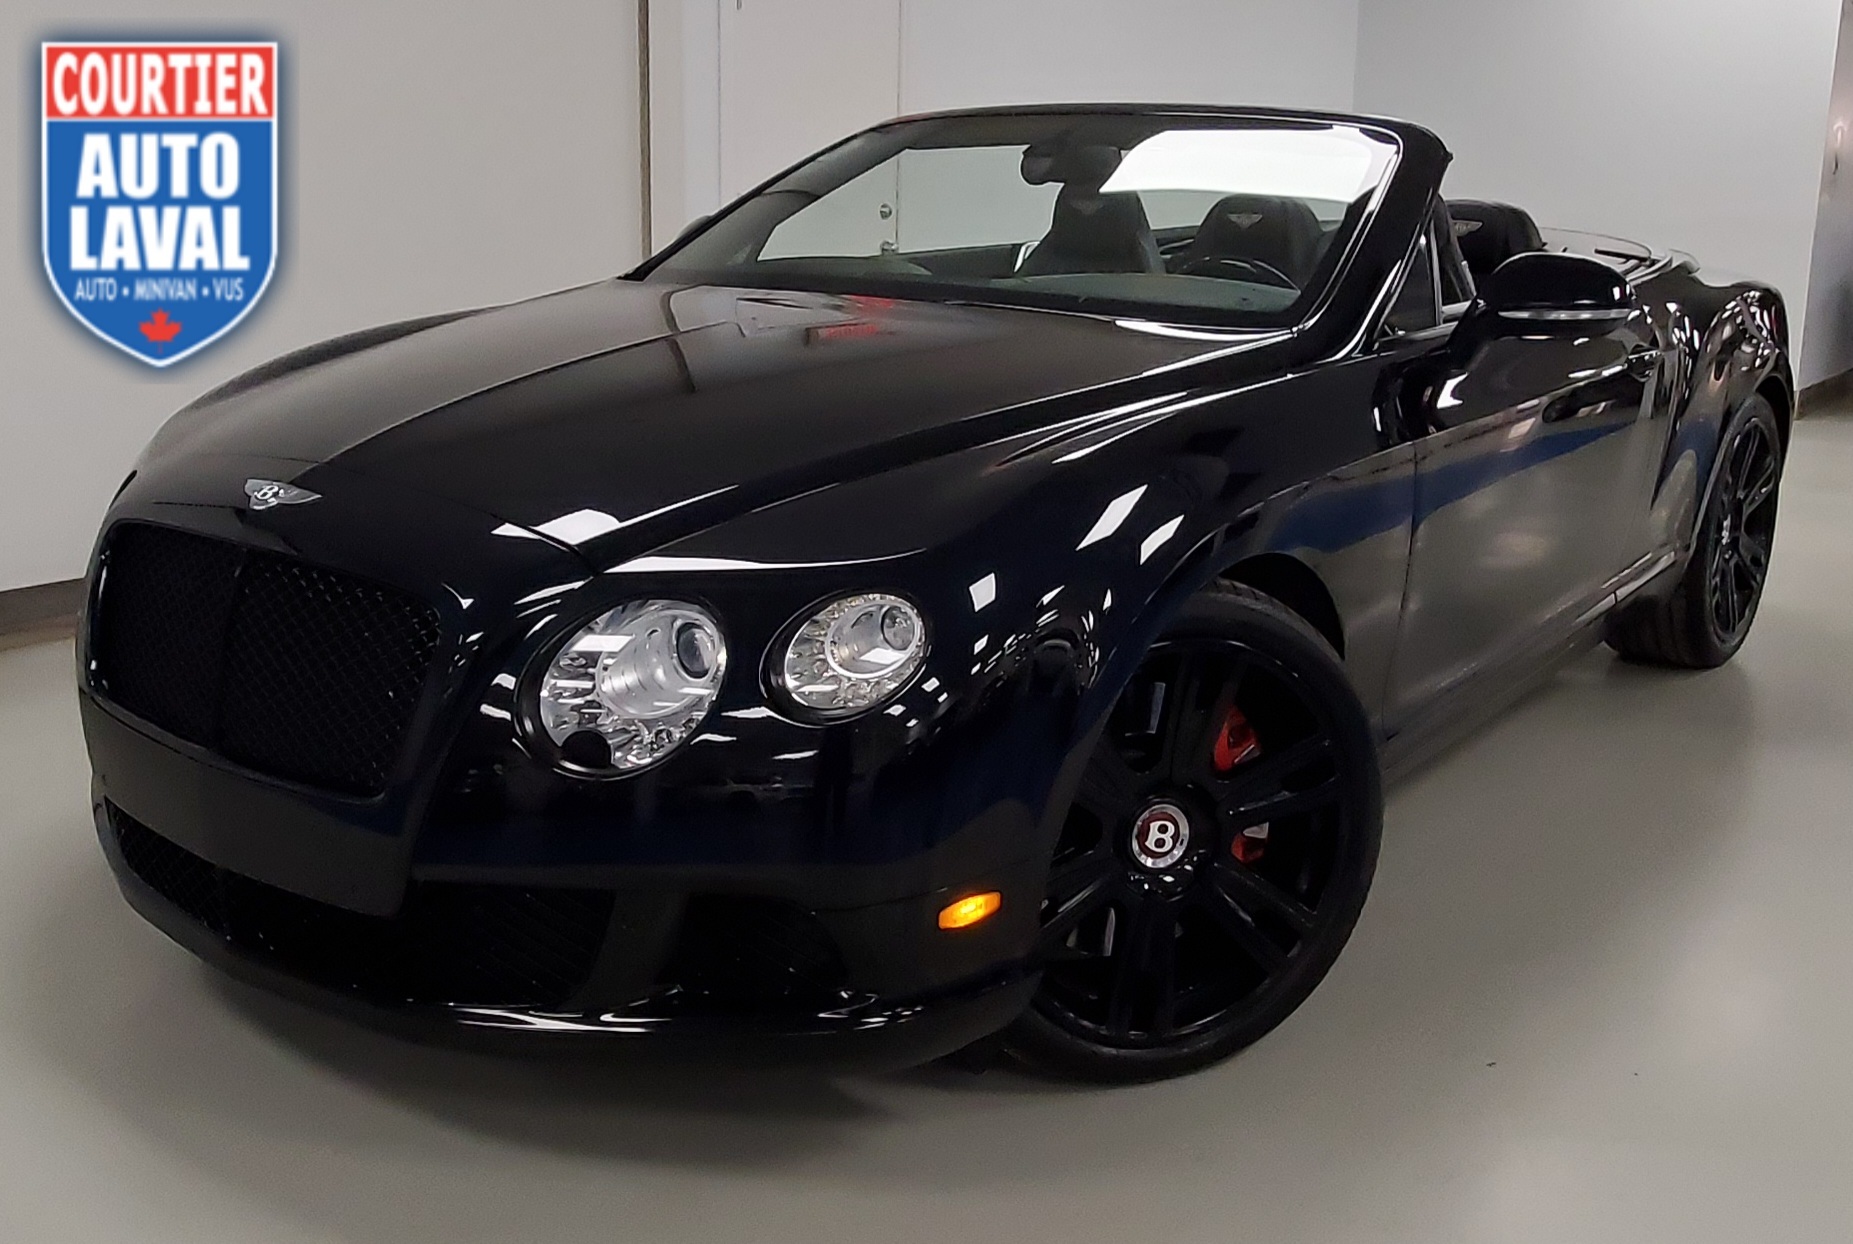 2014 Bentley Continental GT Speed W12 TWIN TURBO @ 567 HP! - CONVERTIBLE - BLACK OUT